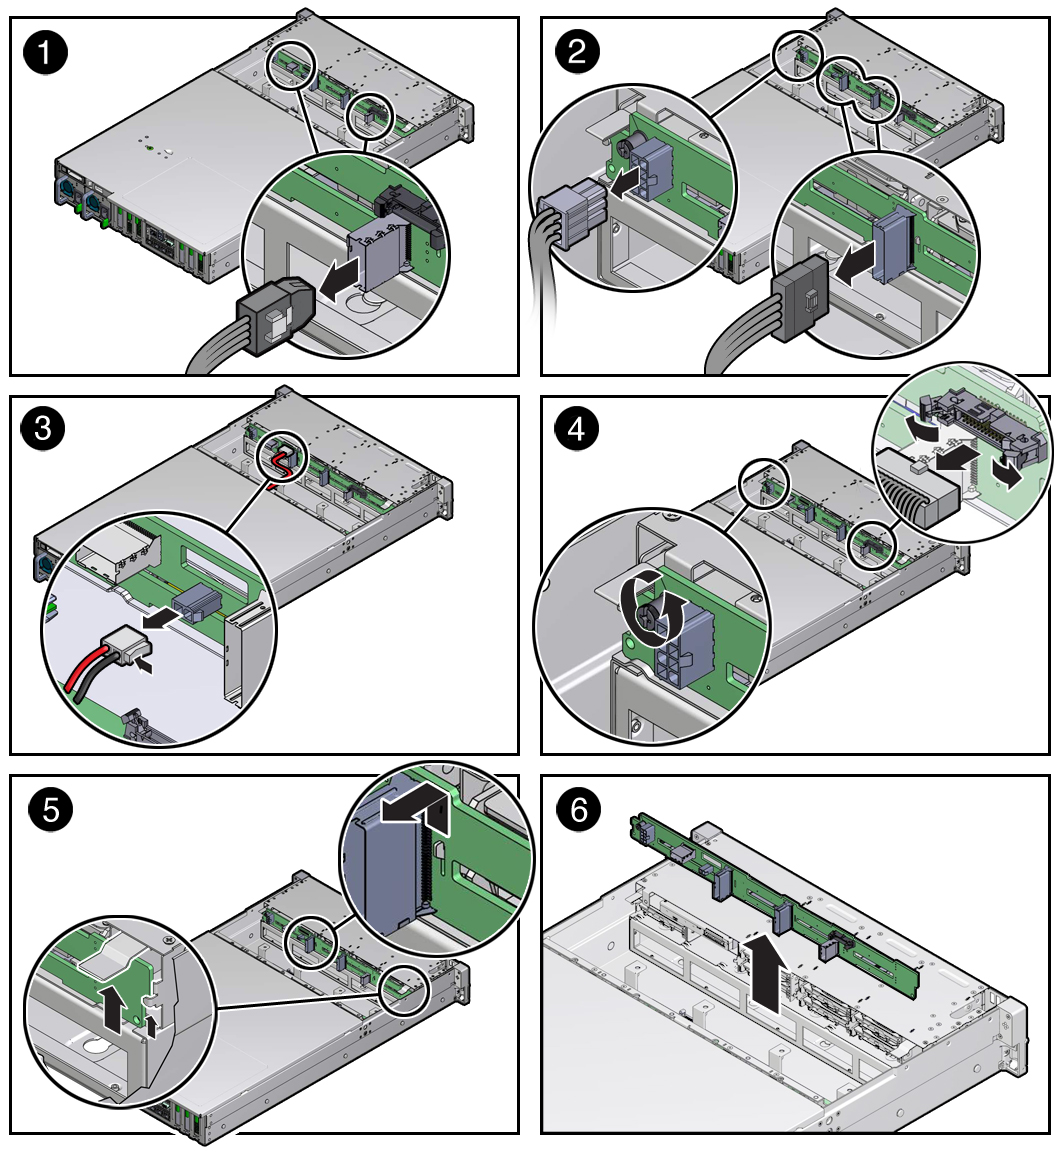 image:Figure showing how to remove the drive backplane.